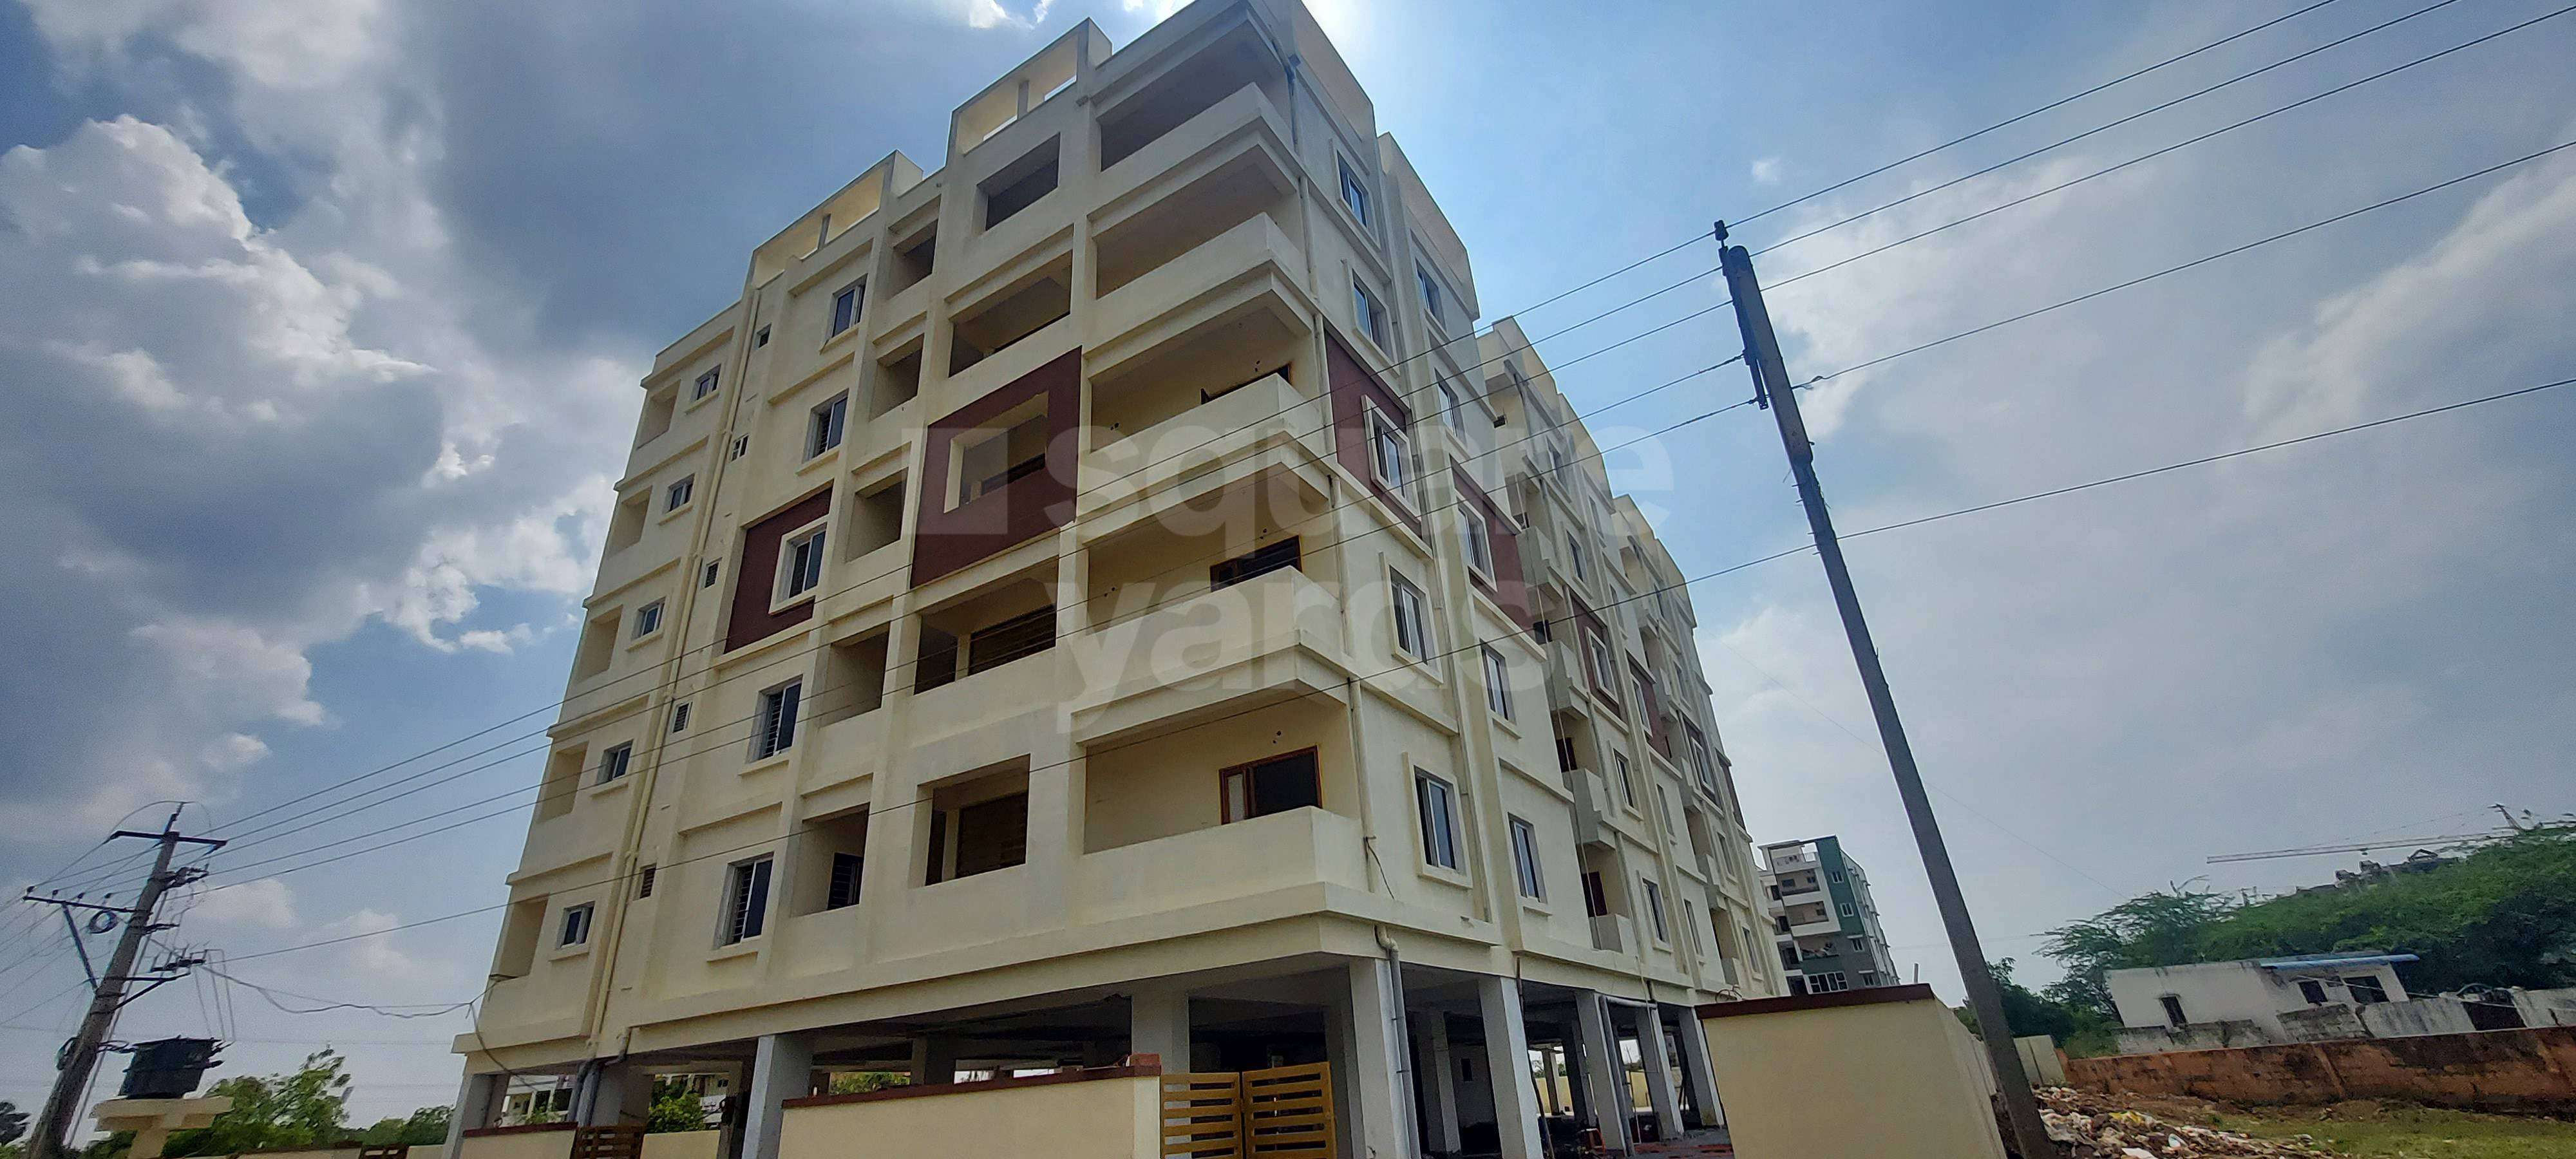 Ready to move 2 bhk flats for sale # 47 laks only. - For Sale: Houses &  Apartments - 1763121043